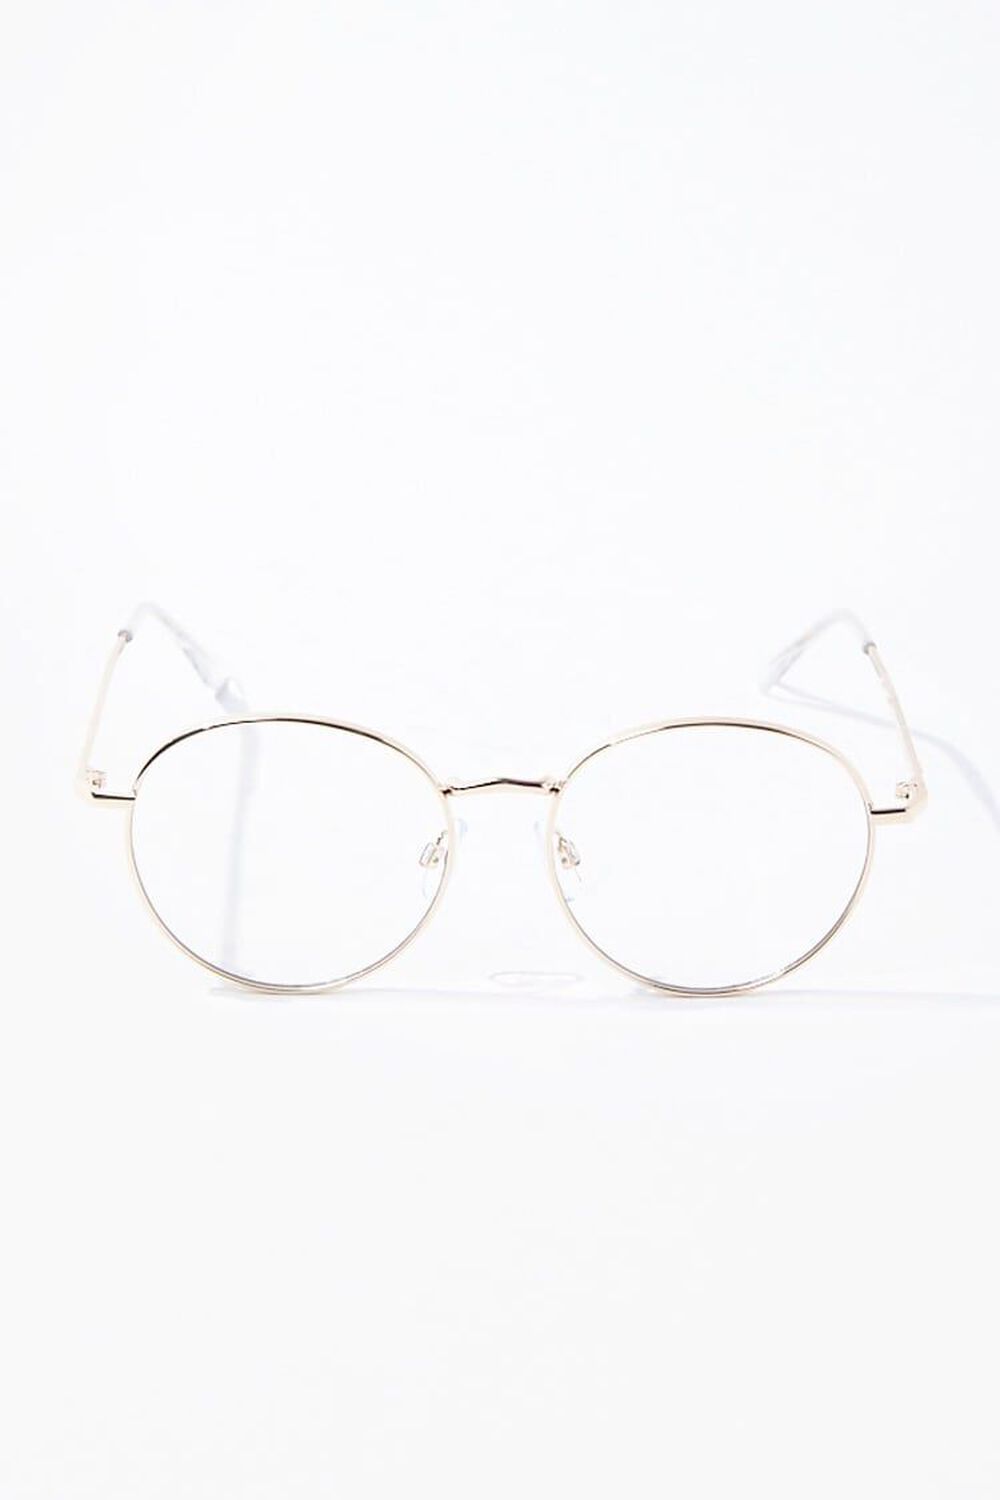 alexis mills recommends Forever 21 Nerd Glasses